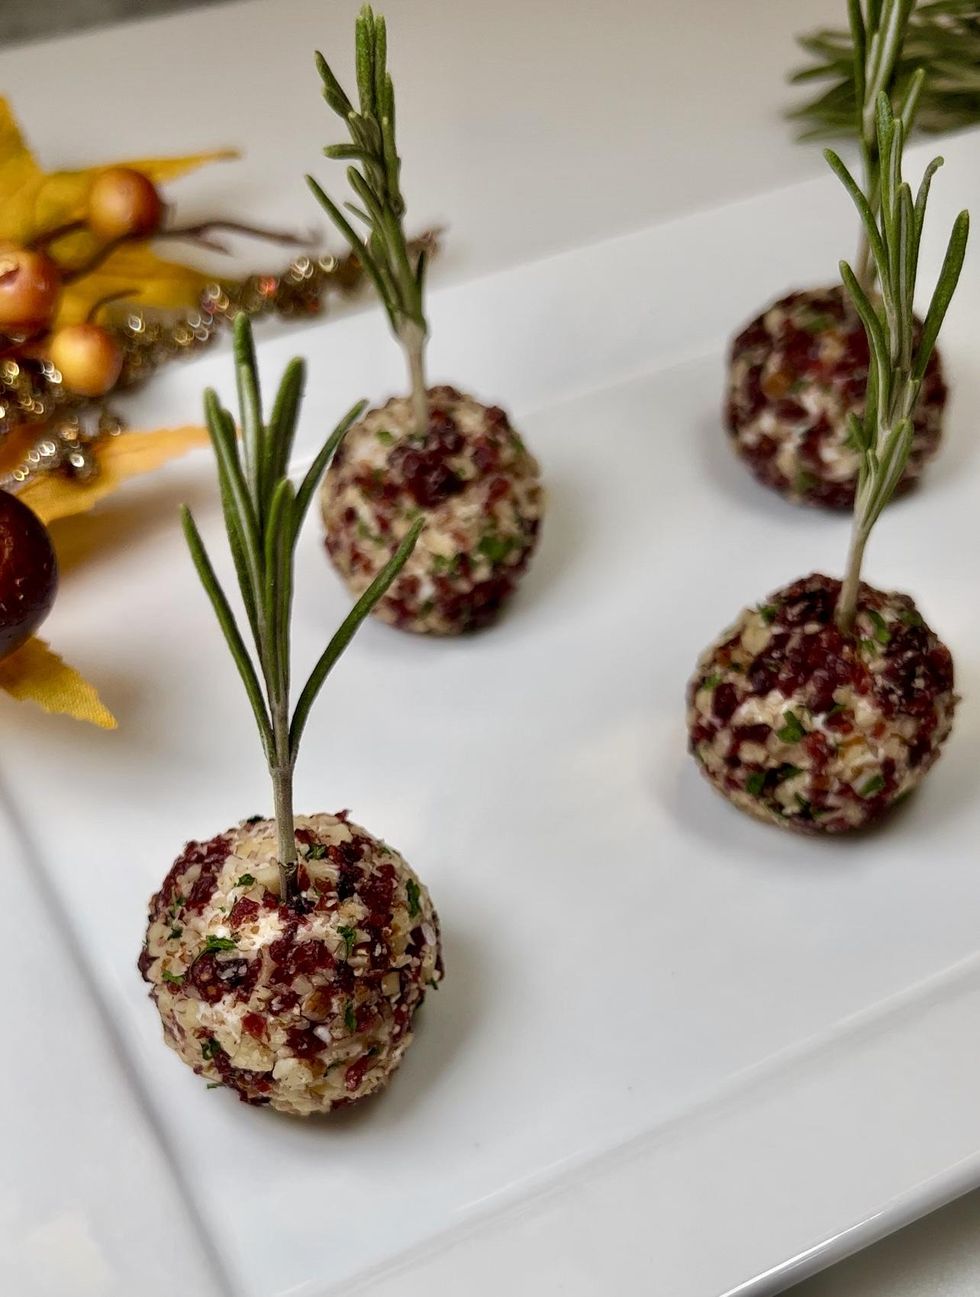 Cranberry Goat Cheese Balls with Rosemary Skewers by Chef Genevieve LaMonaca